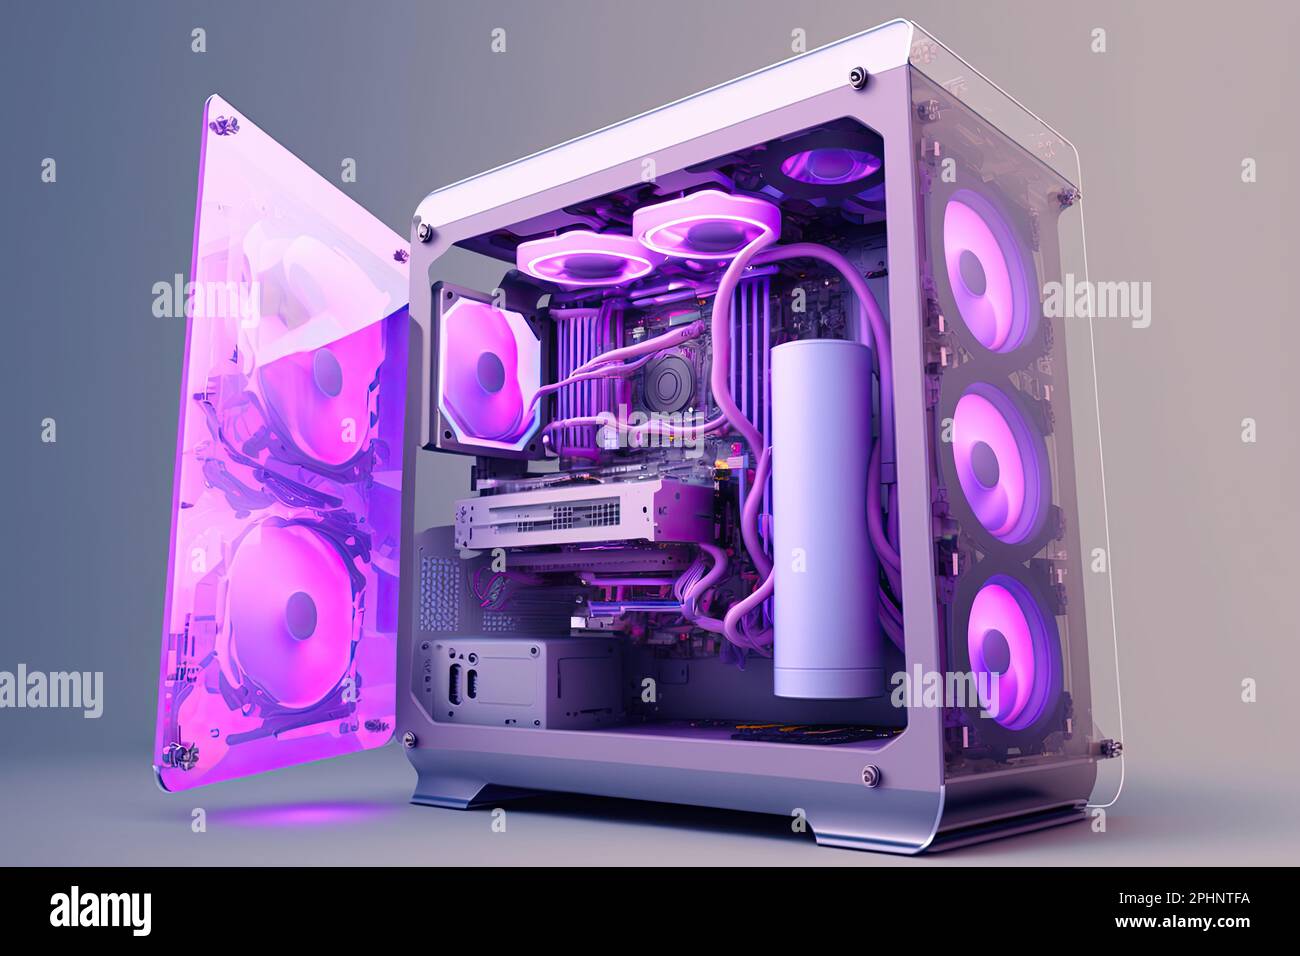 Build of PC in black computer tower case Stock Photo - Alamy